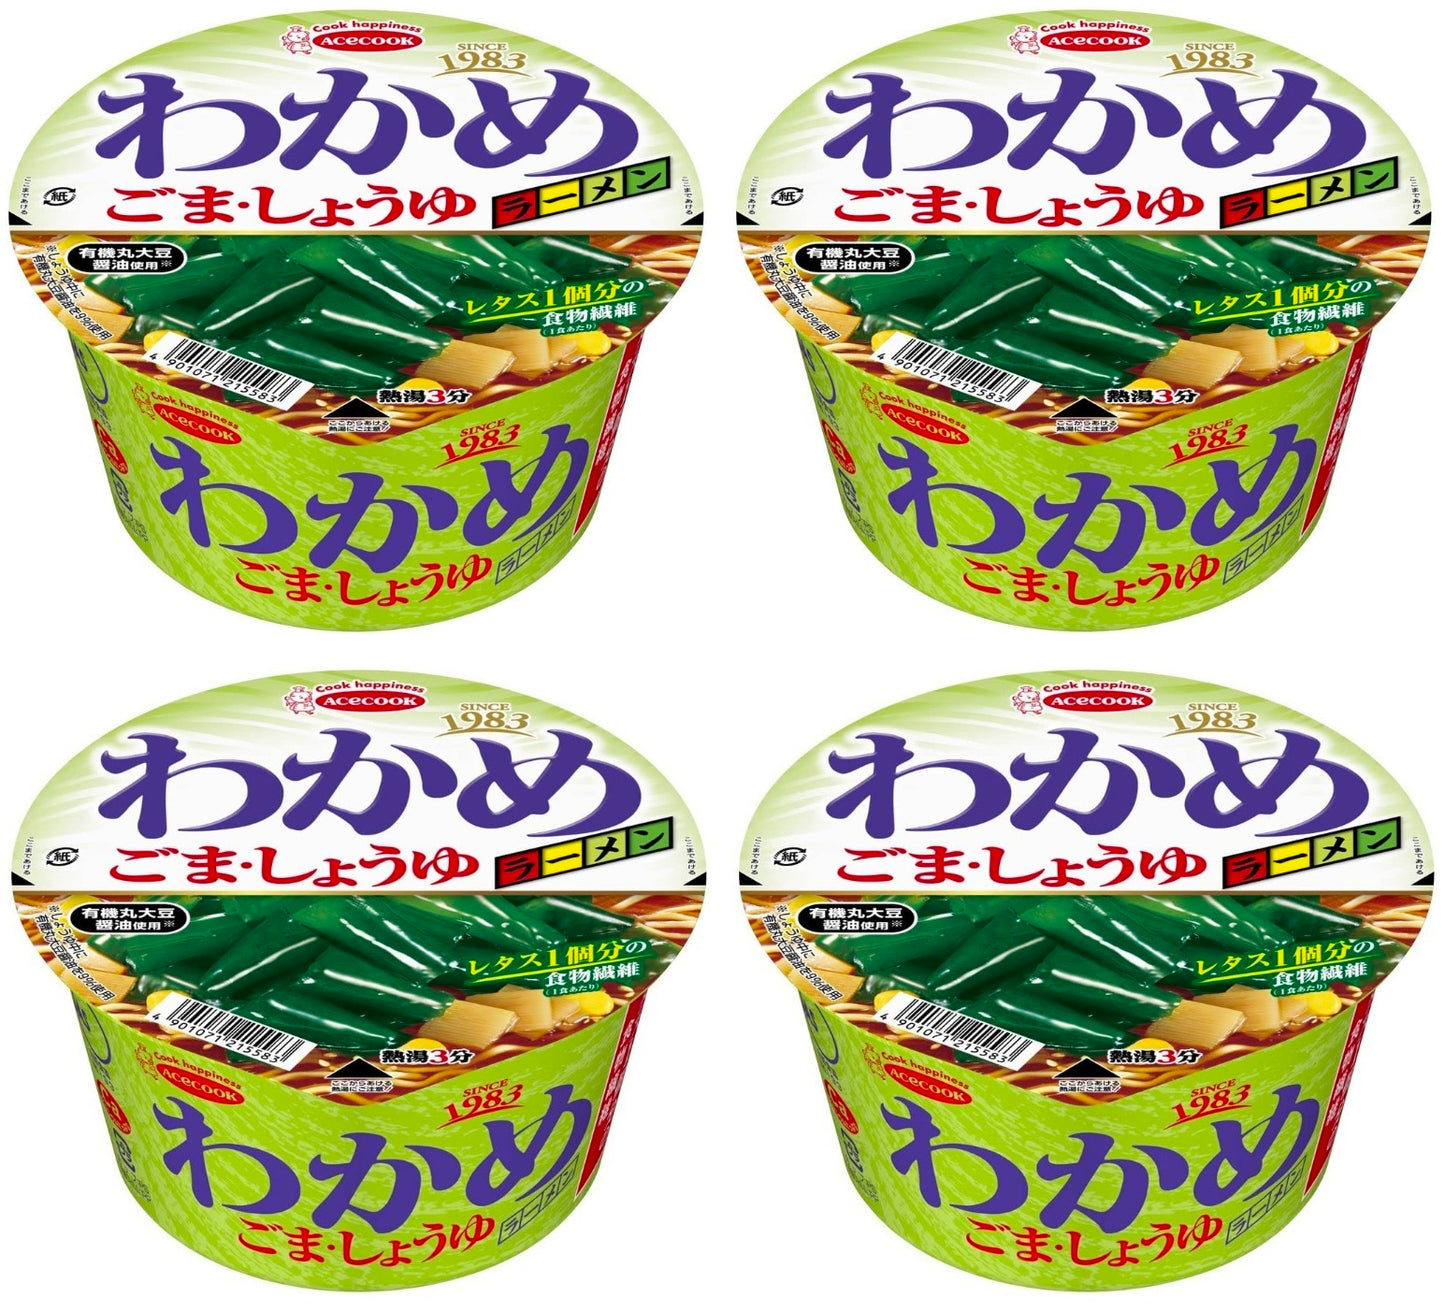 Japanese Ramen Noodle Wakame Seaweed Soy Sauce Instant Food Soup Cup Acecook 93g